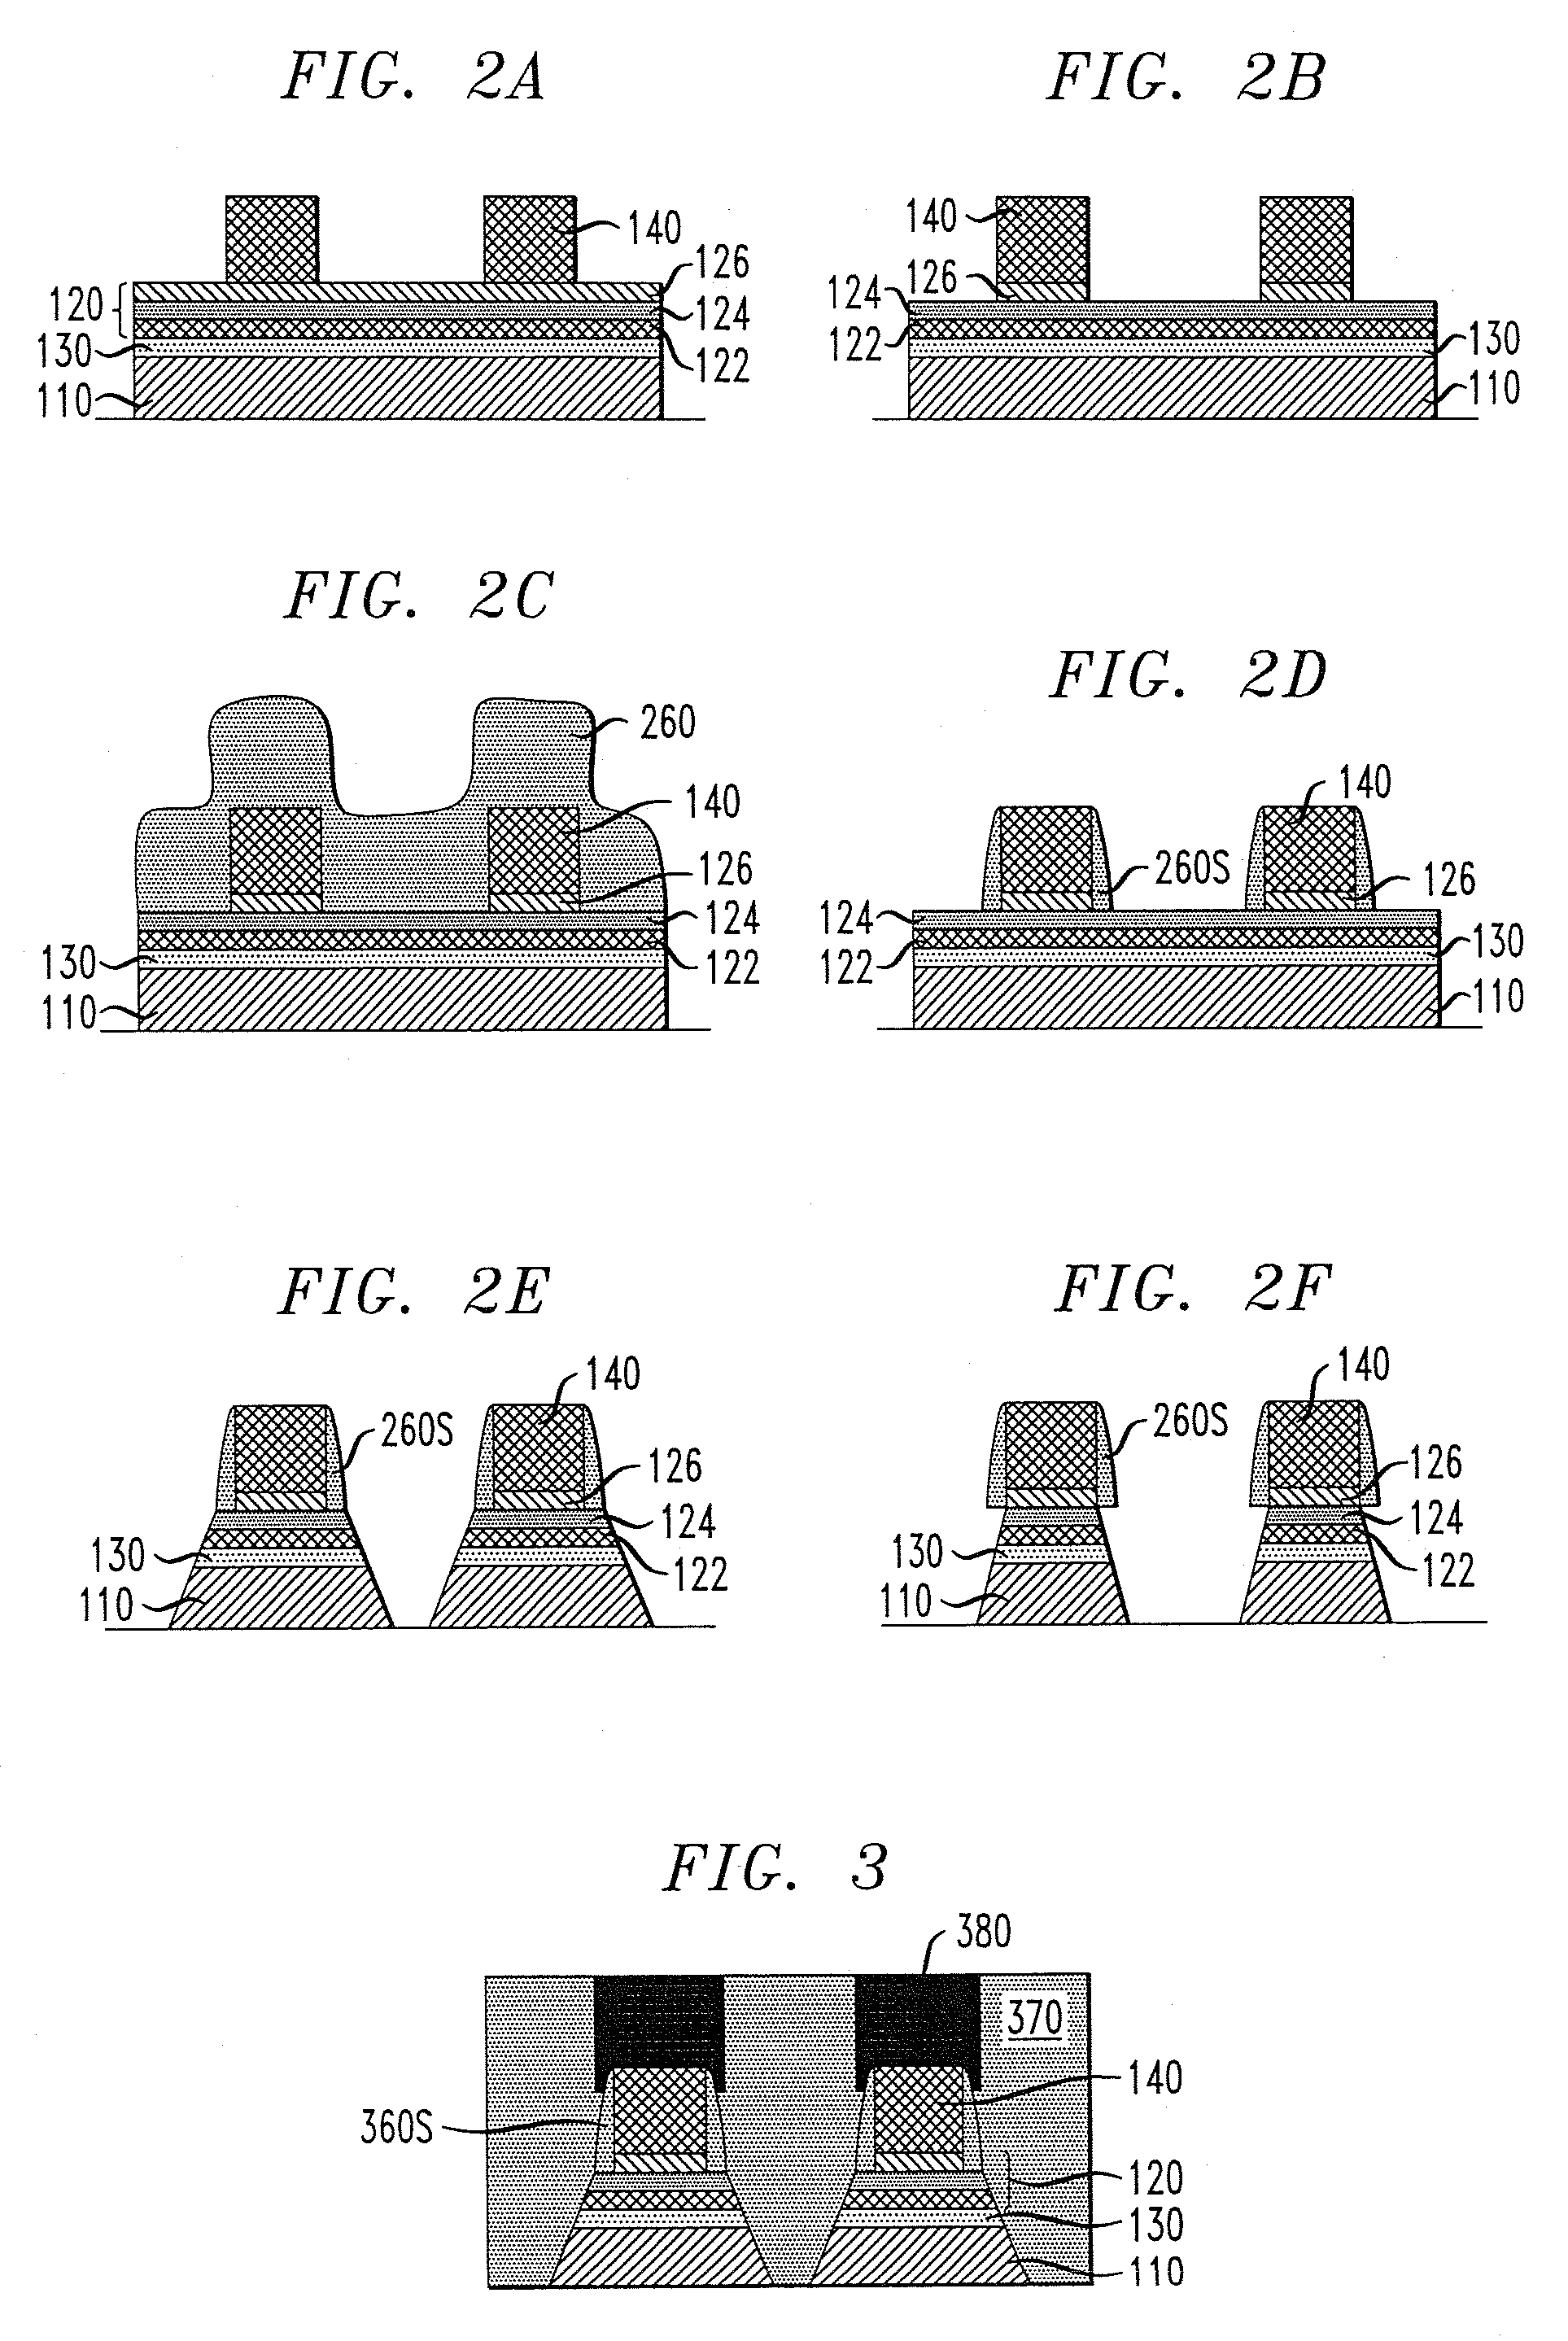 Utilizing Sidewall Spacer Features to Form Magnetic Tunnel Junctions in an Integrated Circuit